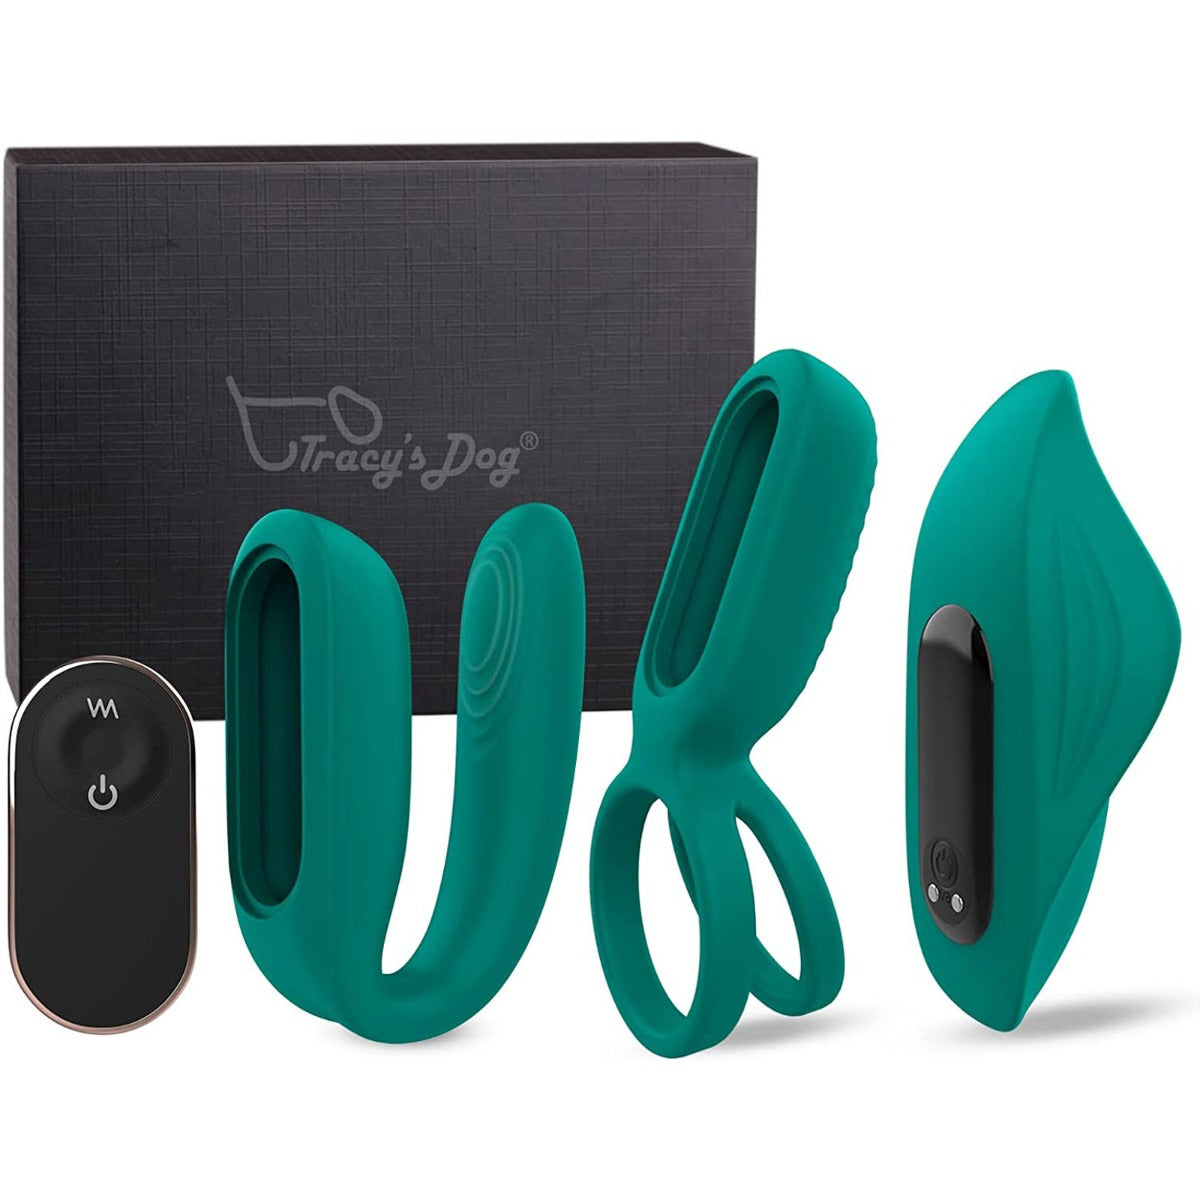 Tracy's Dog | Vibrating Sex Toy Kits Versatile for Couples - Green